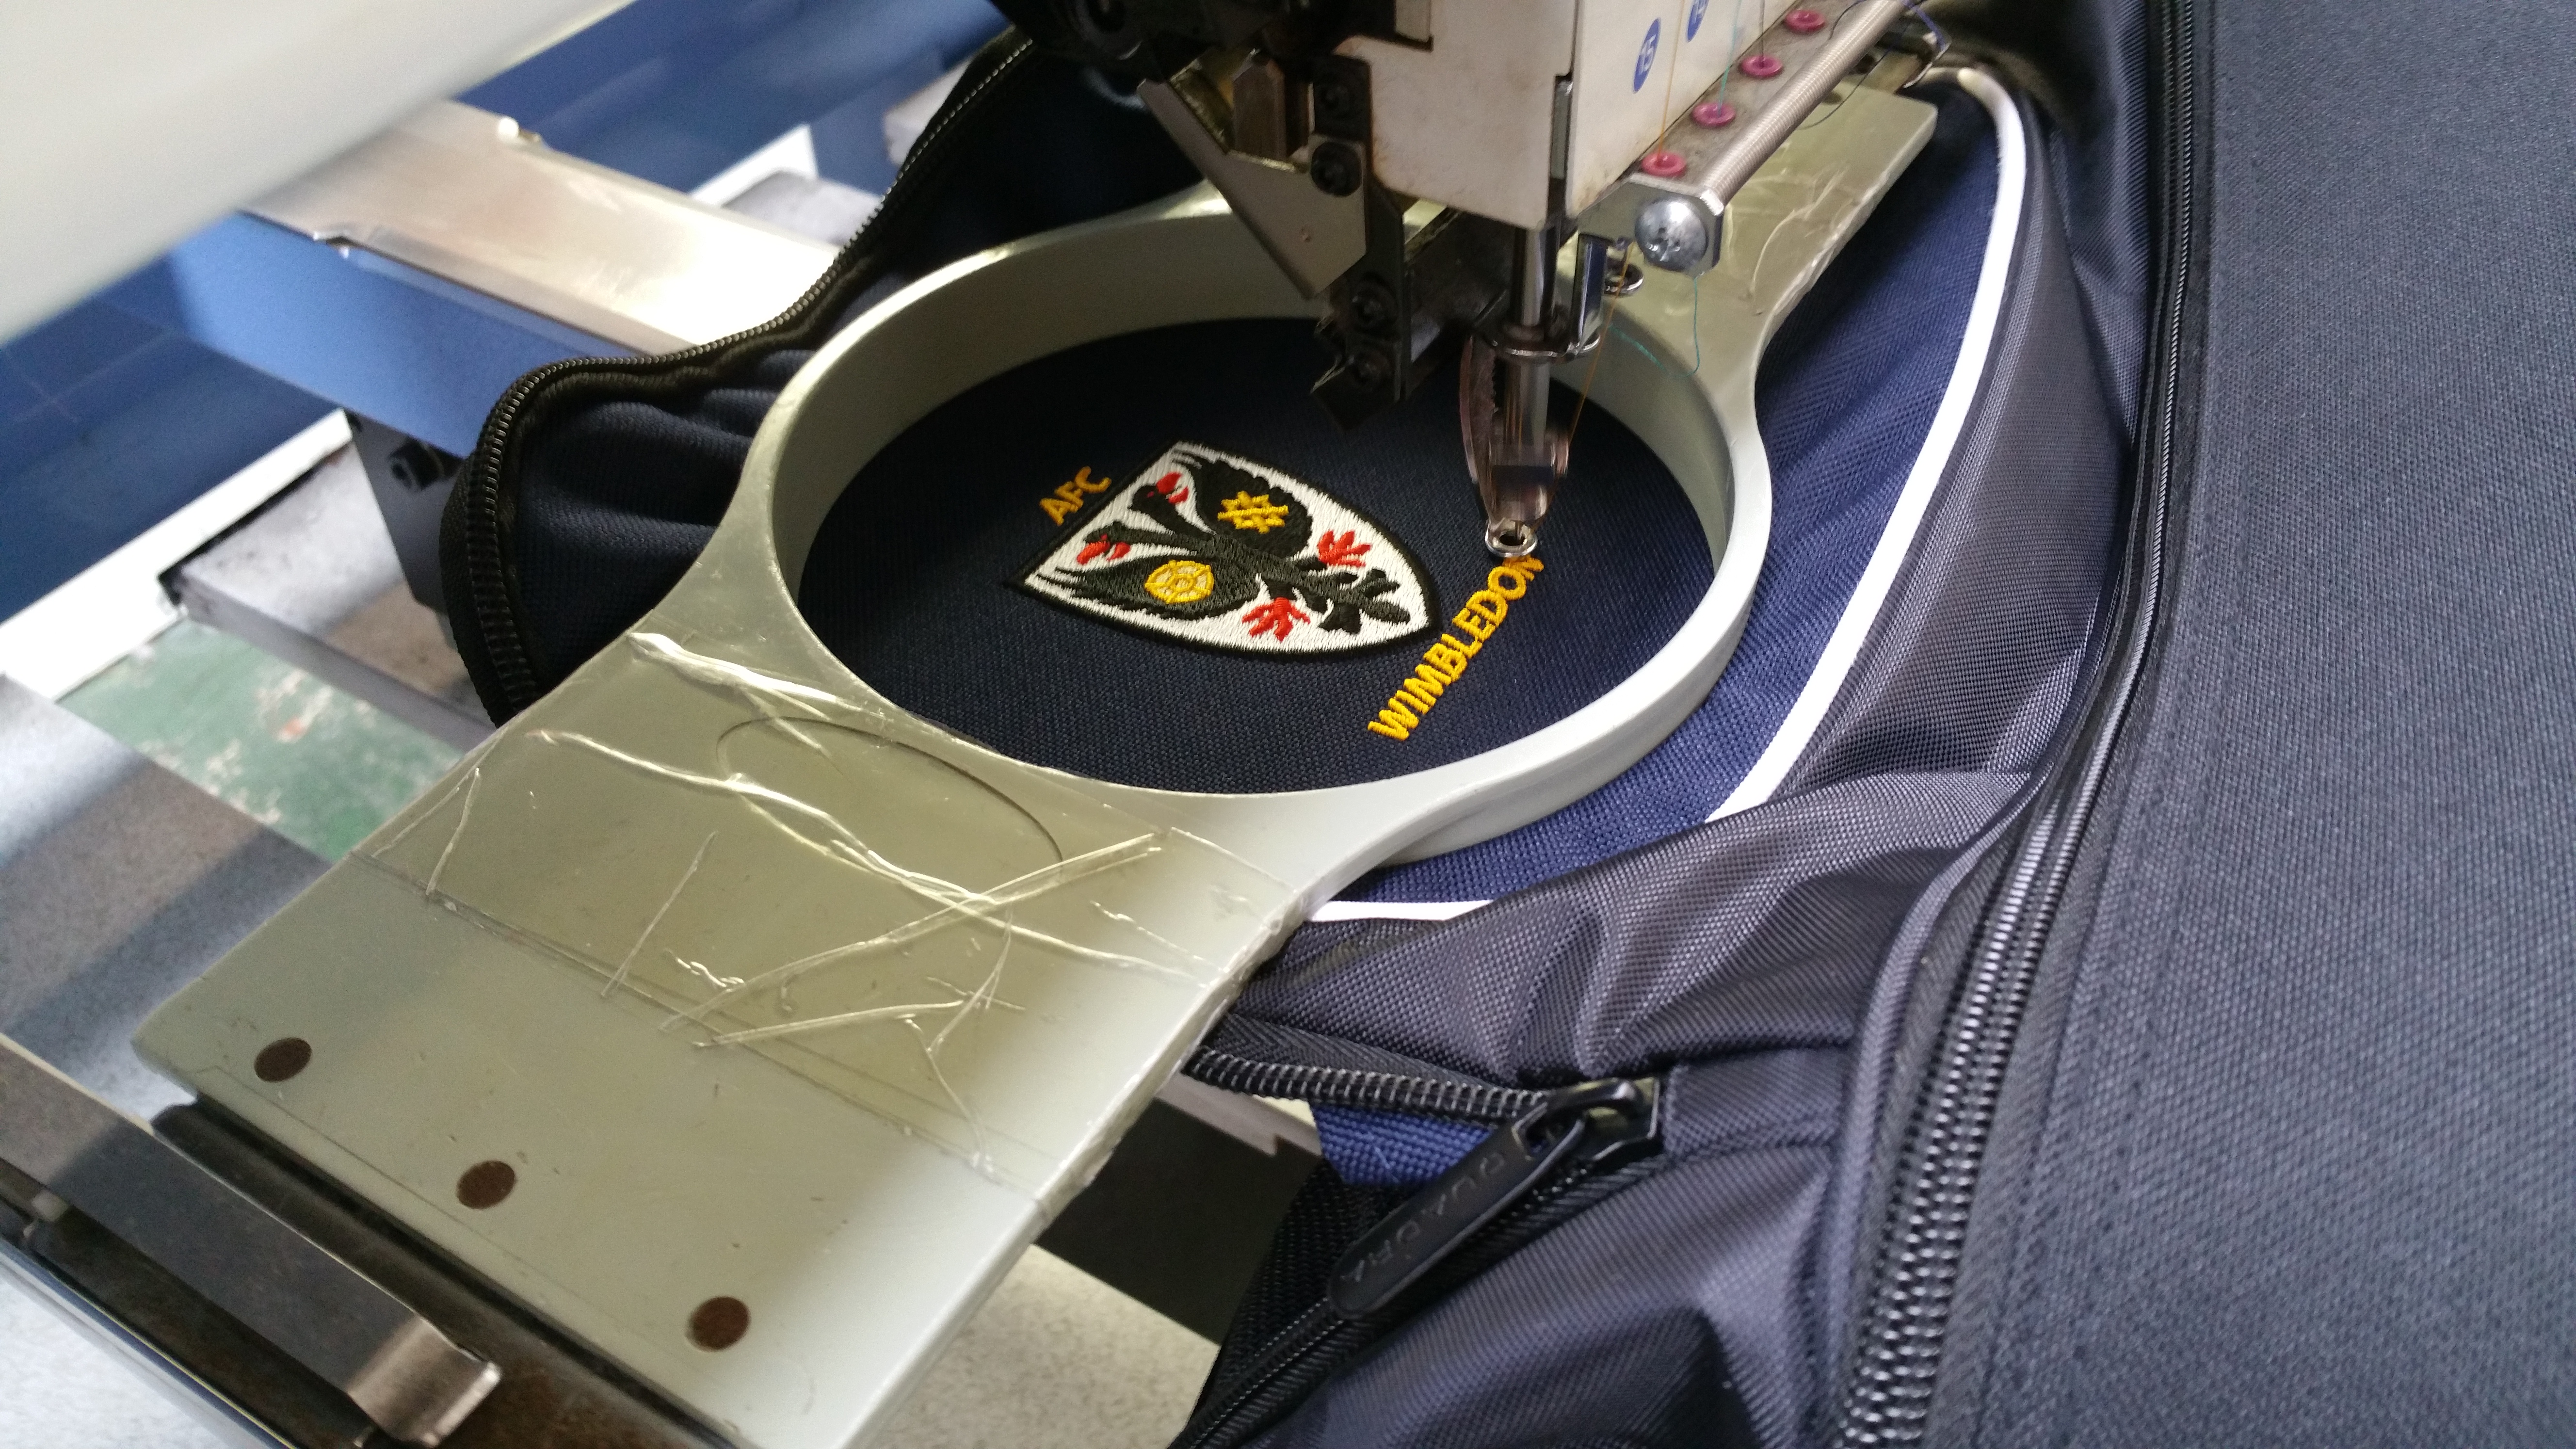 An image of AFC Wimbledon's logo being embroidered on a bag